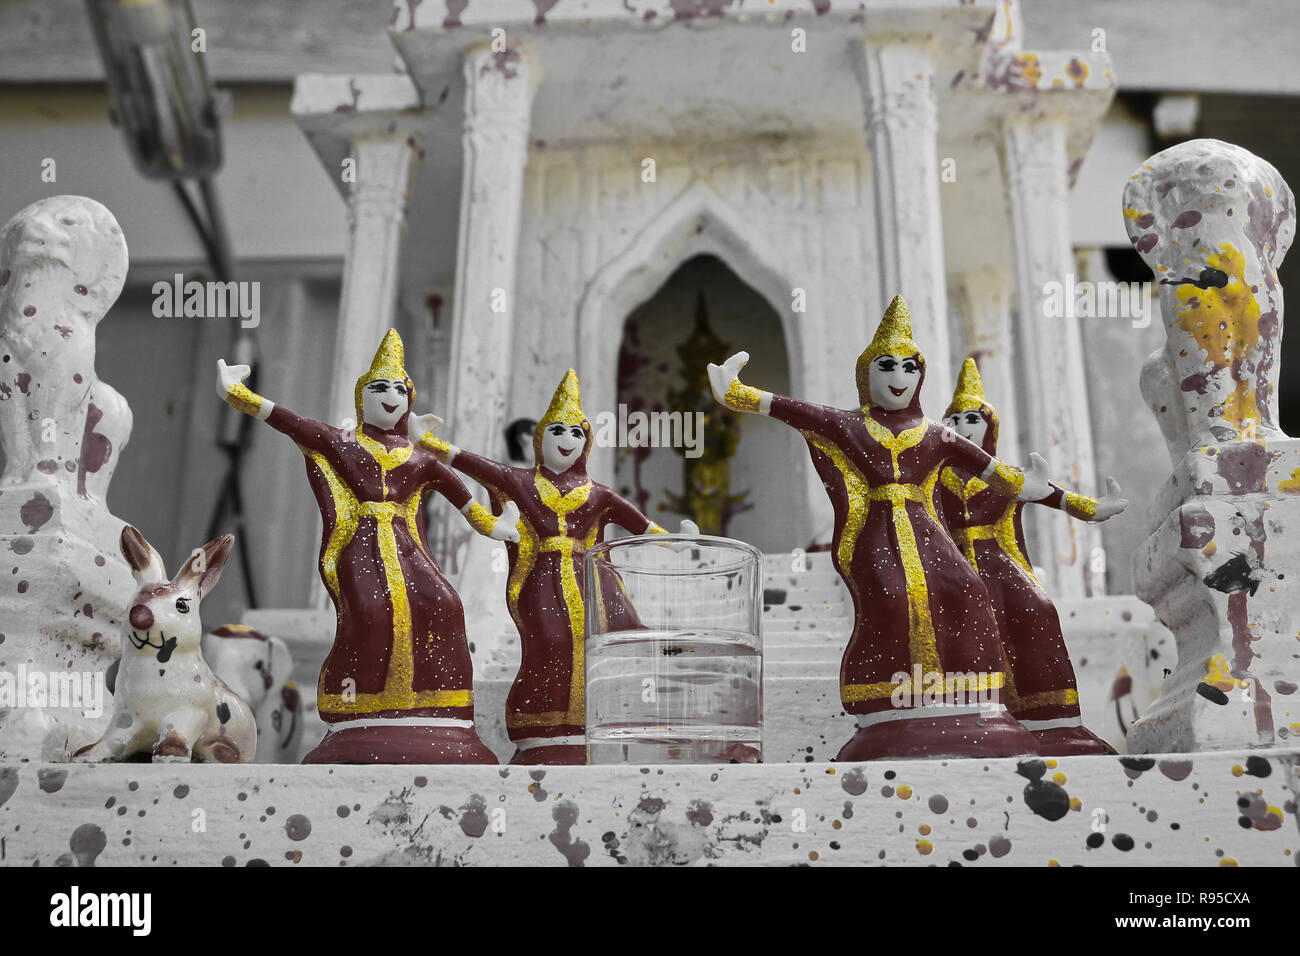 This unique photo shows red golden ceramic figures standing in front of a small Buddhist temple. The picture was taken in Thailand Stock Photo